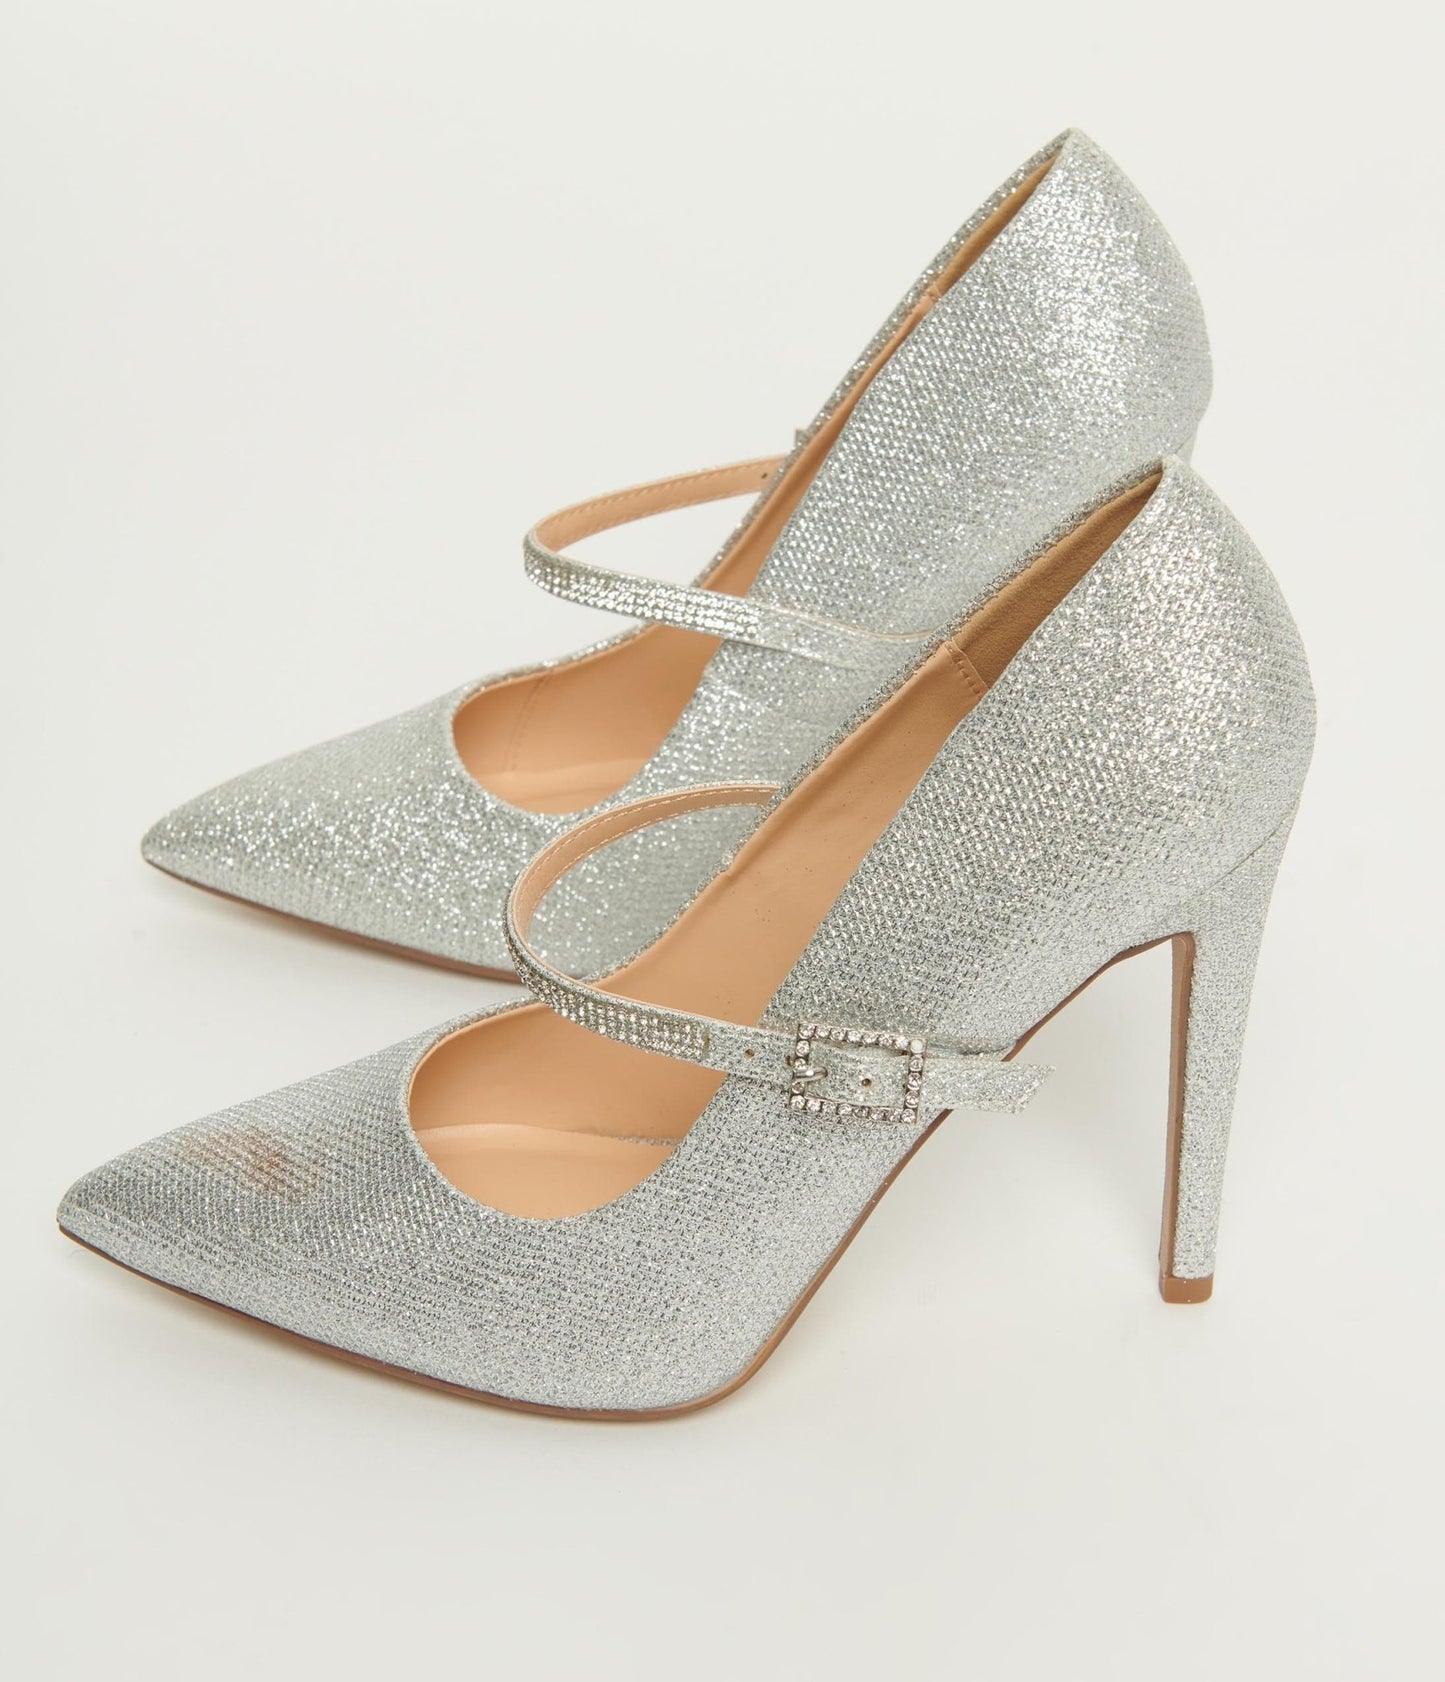 Silver Sparkle Pointed Toe Rhinestone Heels - Unique Vintage - Womens, SHOES, HEELS